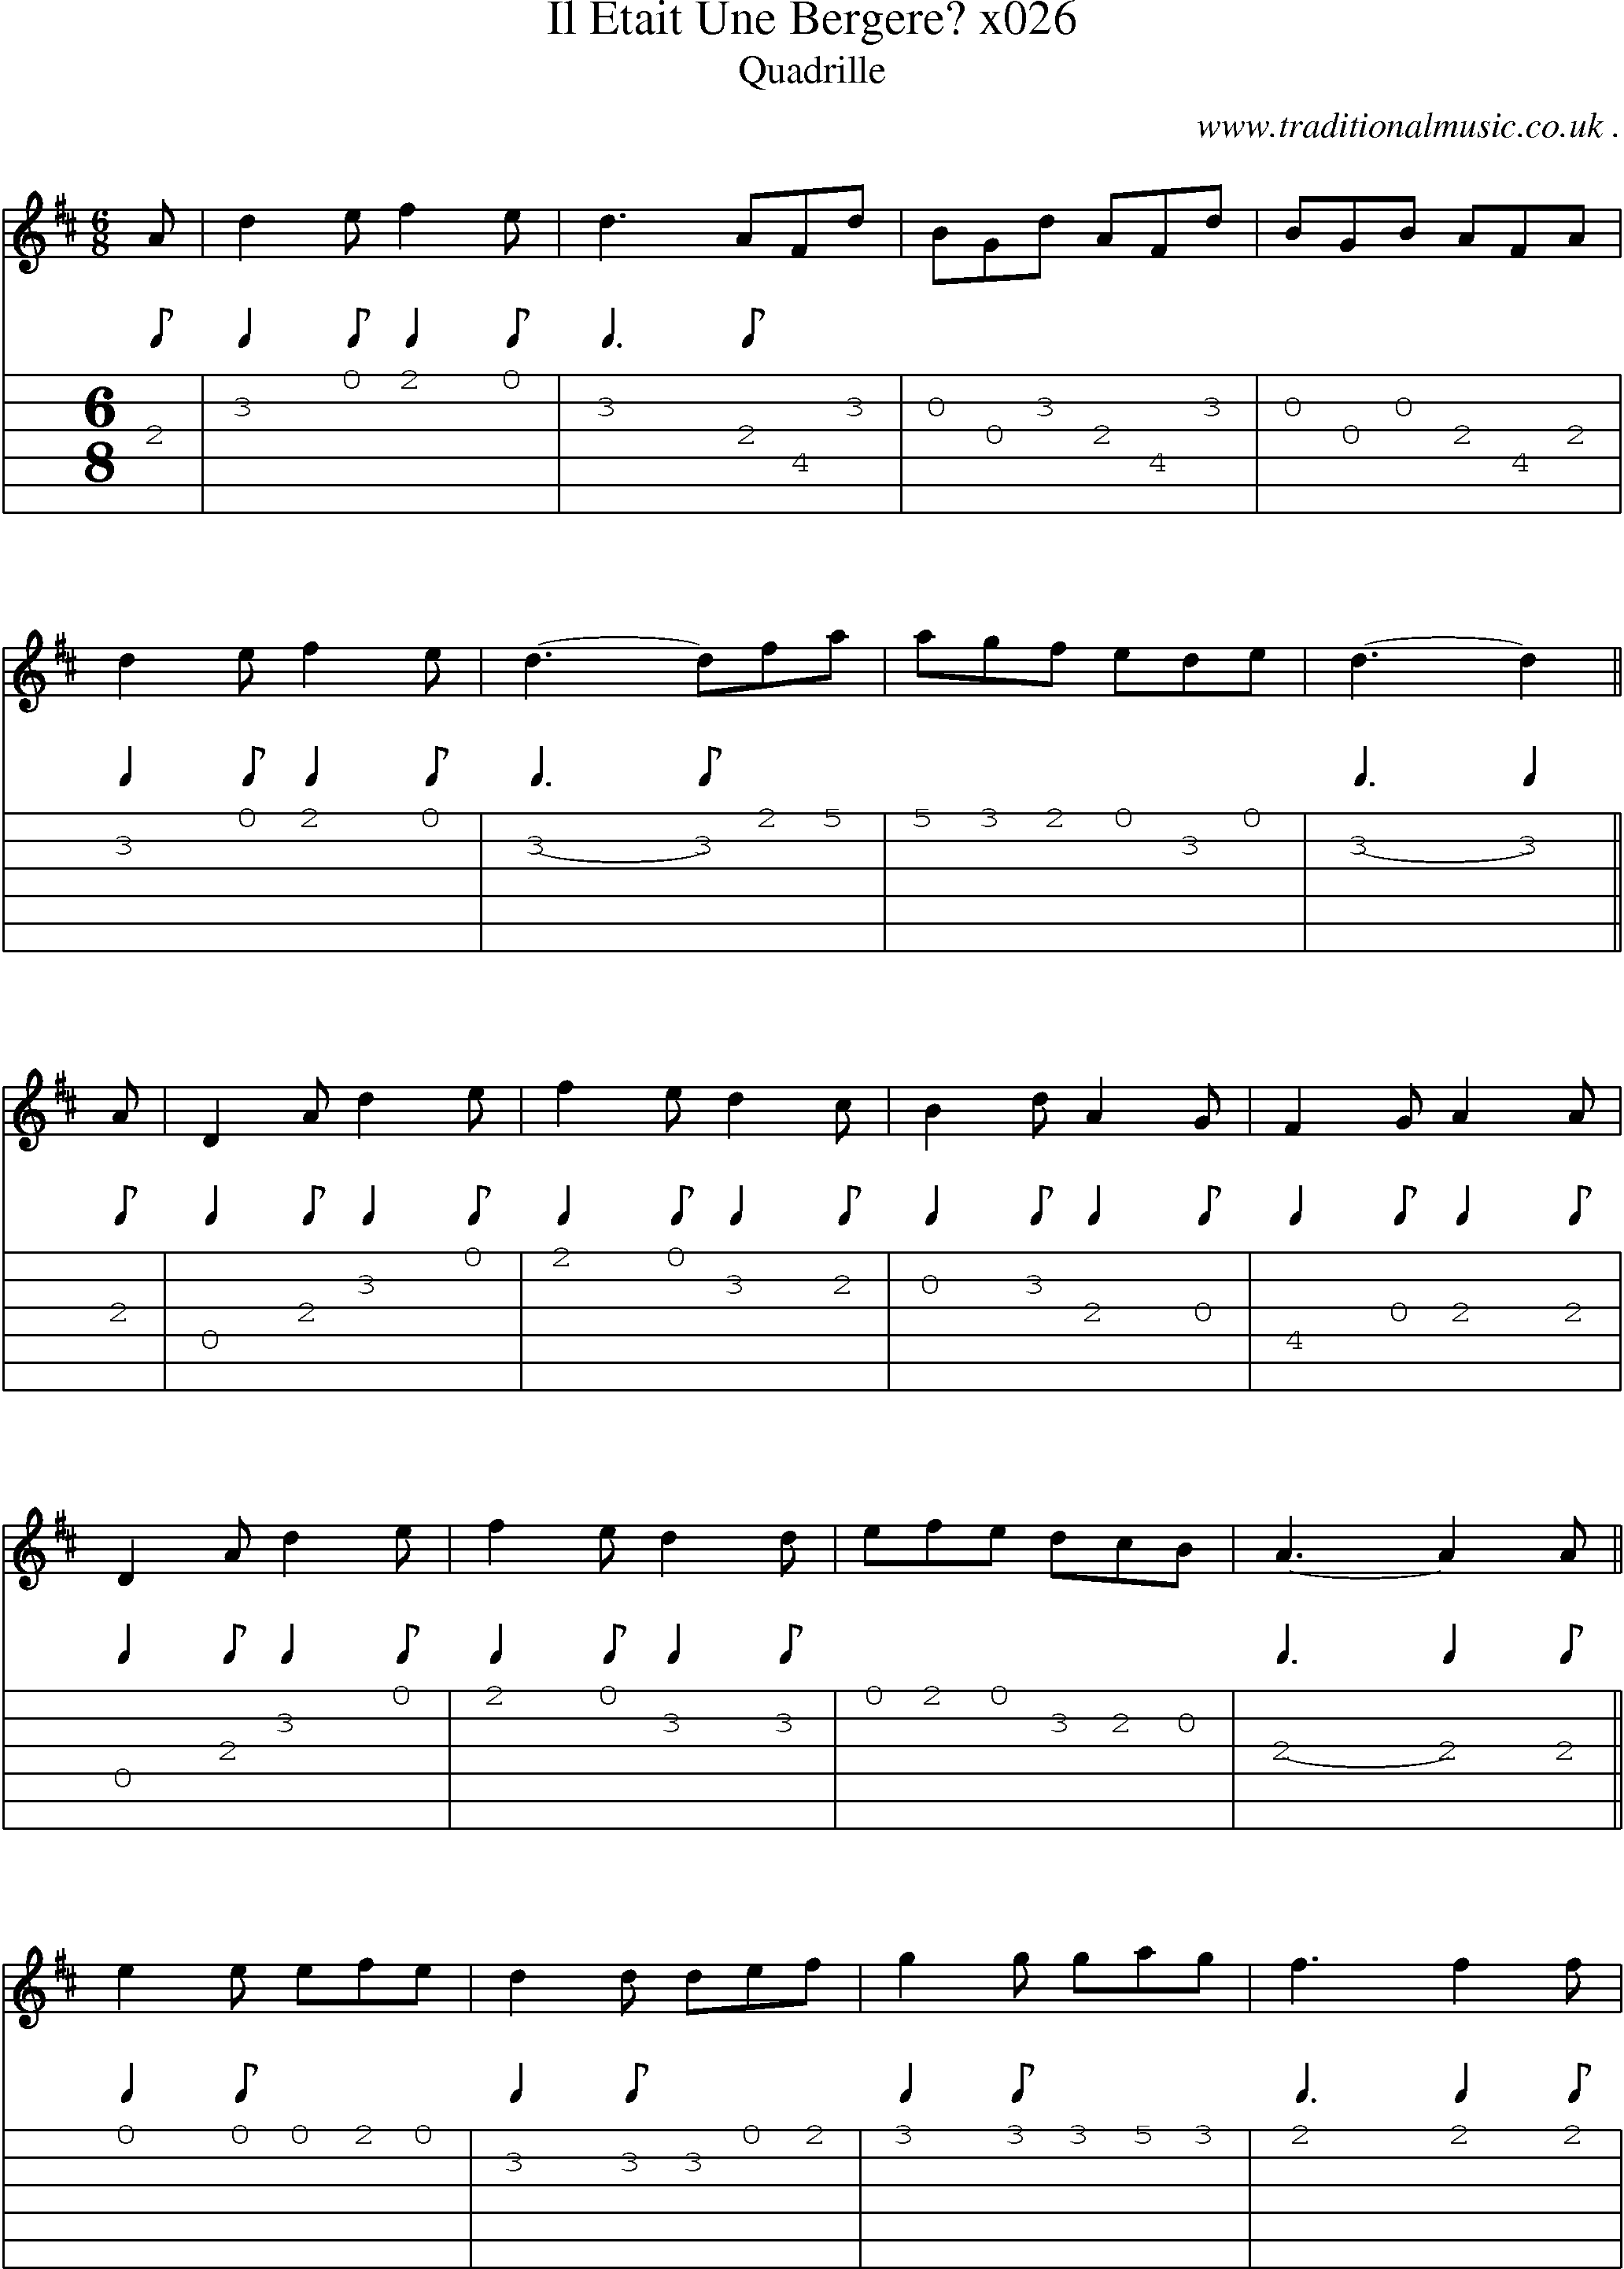 Sheet-Music and Guitar Tabs for Il Etait Une Bergere X026